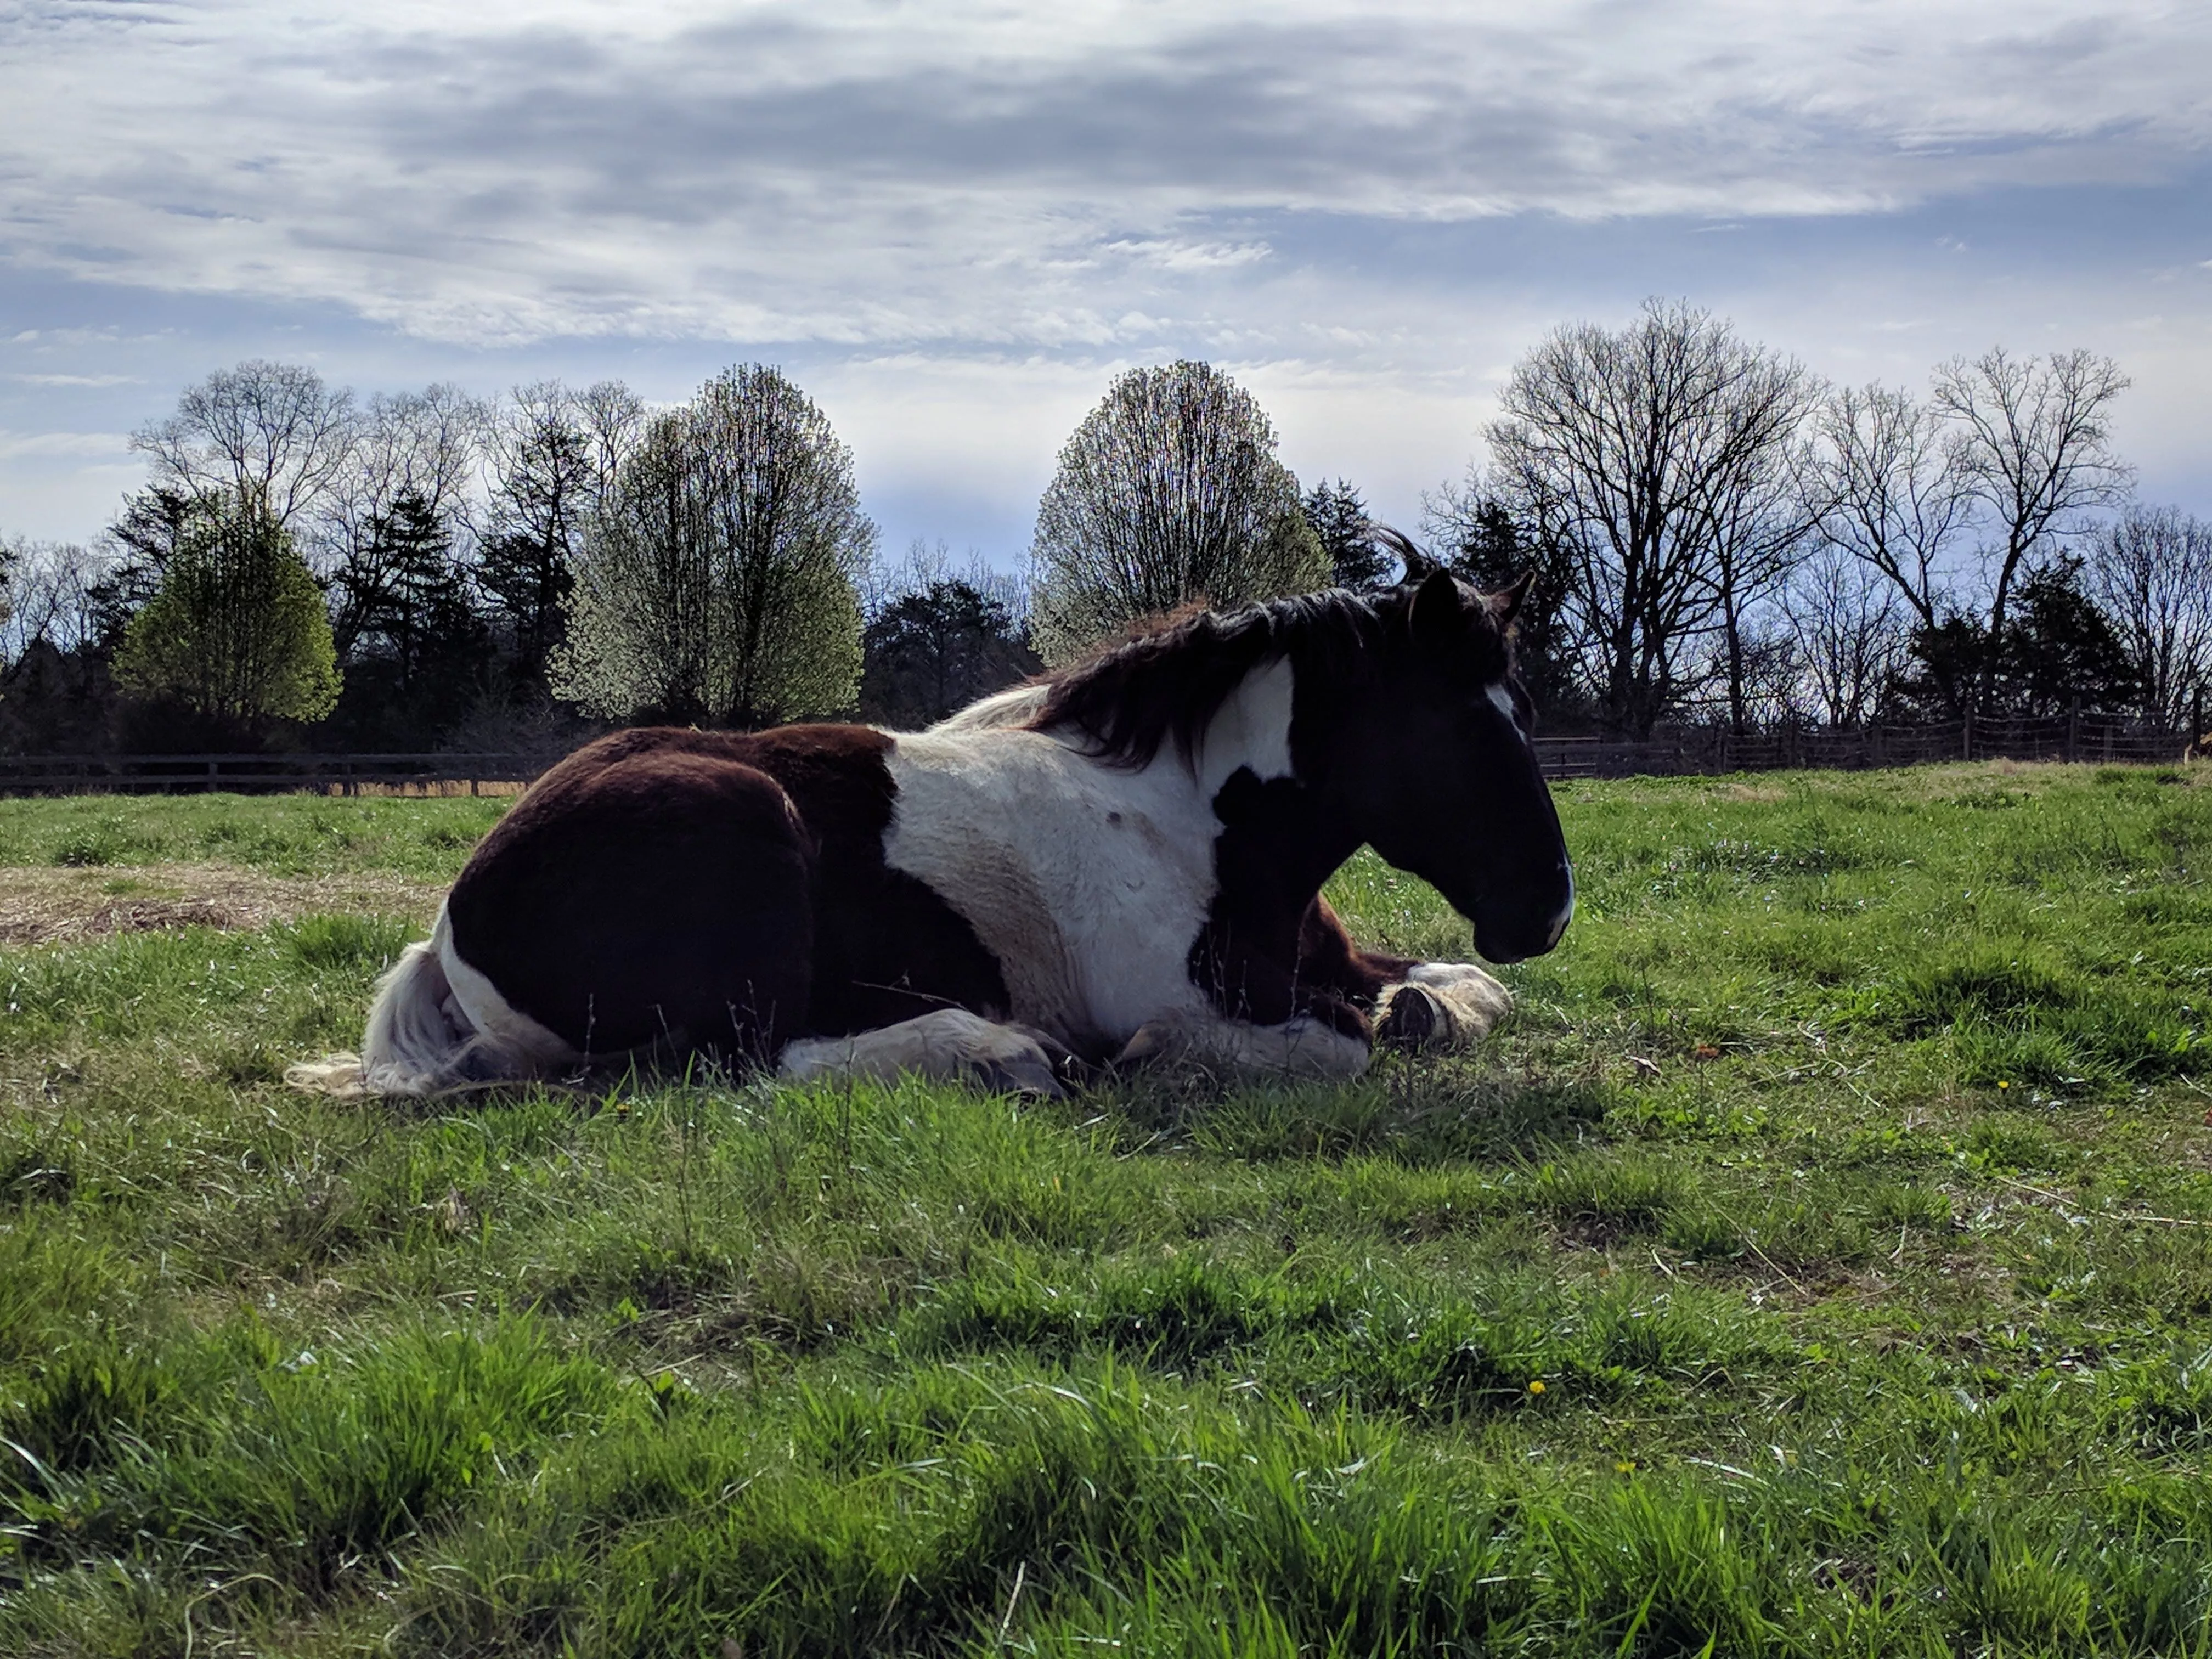 An image of a horse named Oreo lying down in a pasture